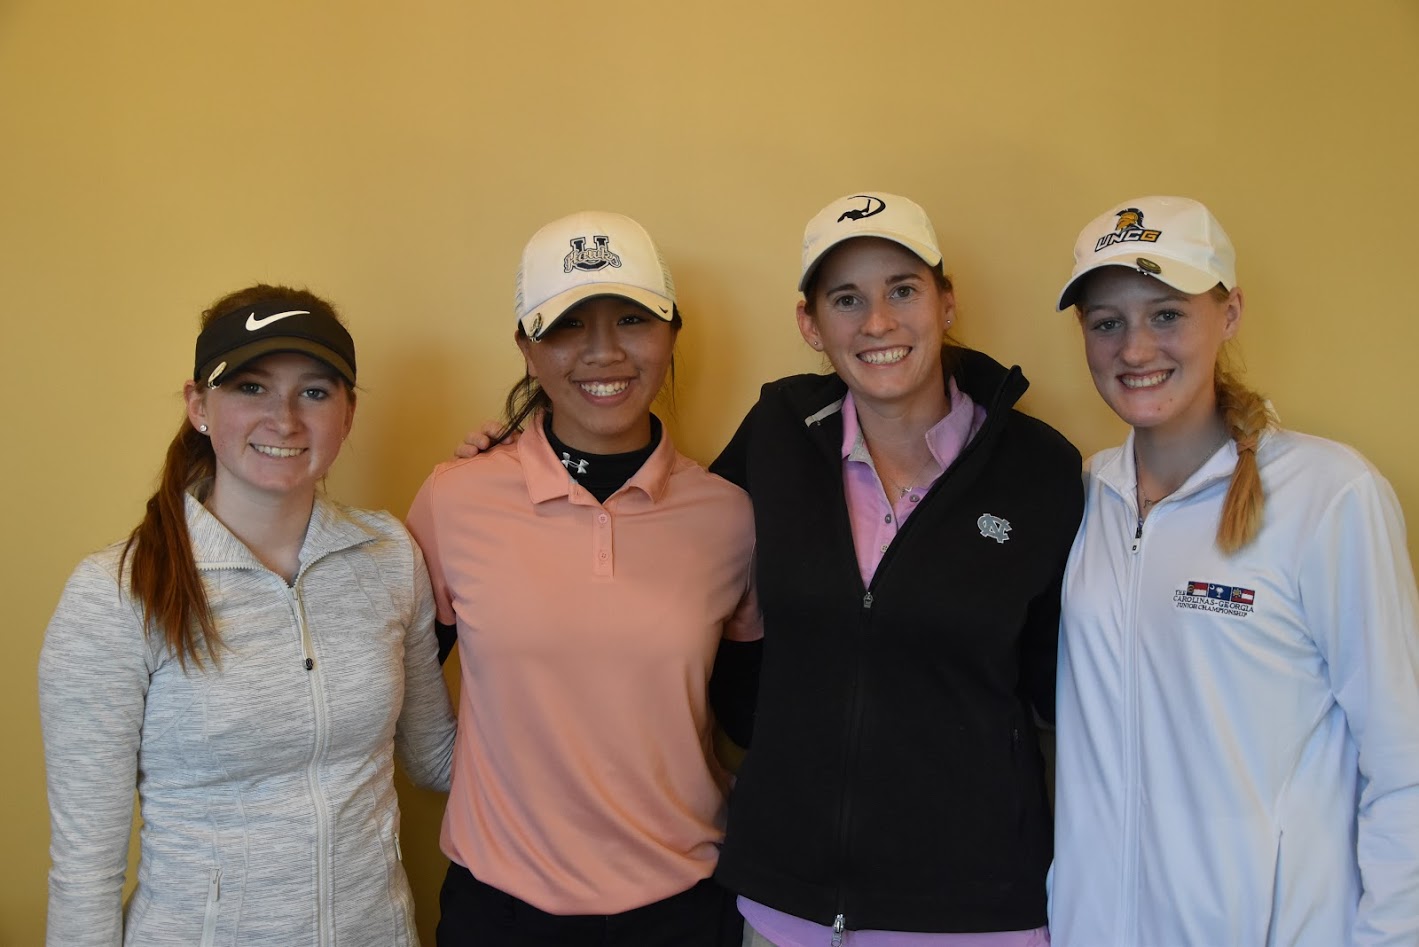 Girls Golf of America Debuts the PKBGT Tradition Series